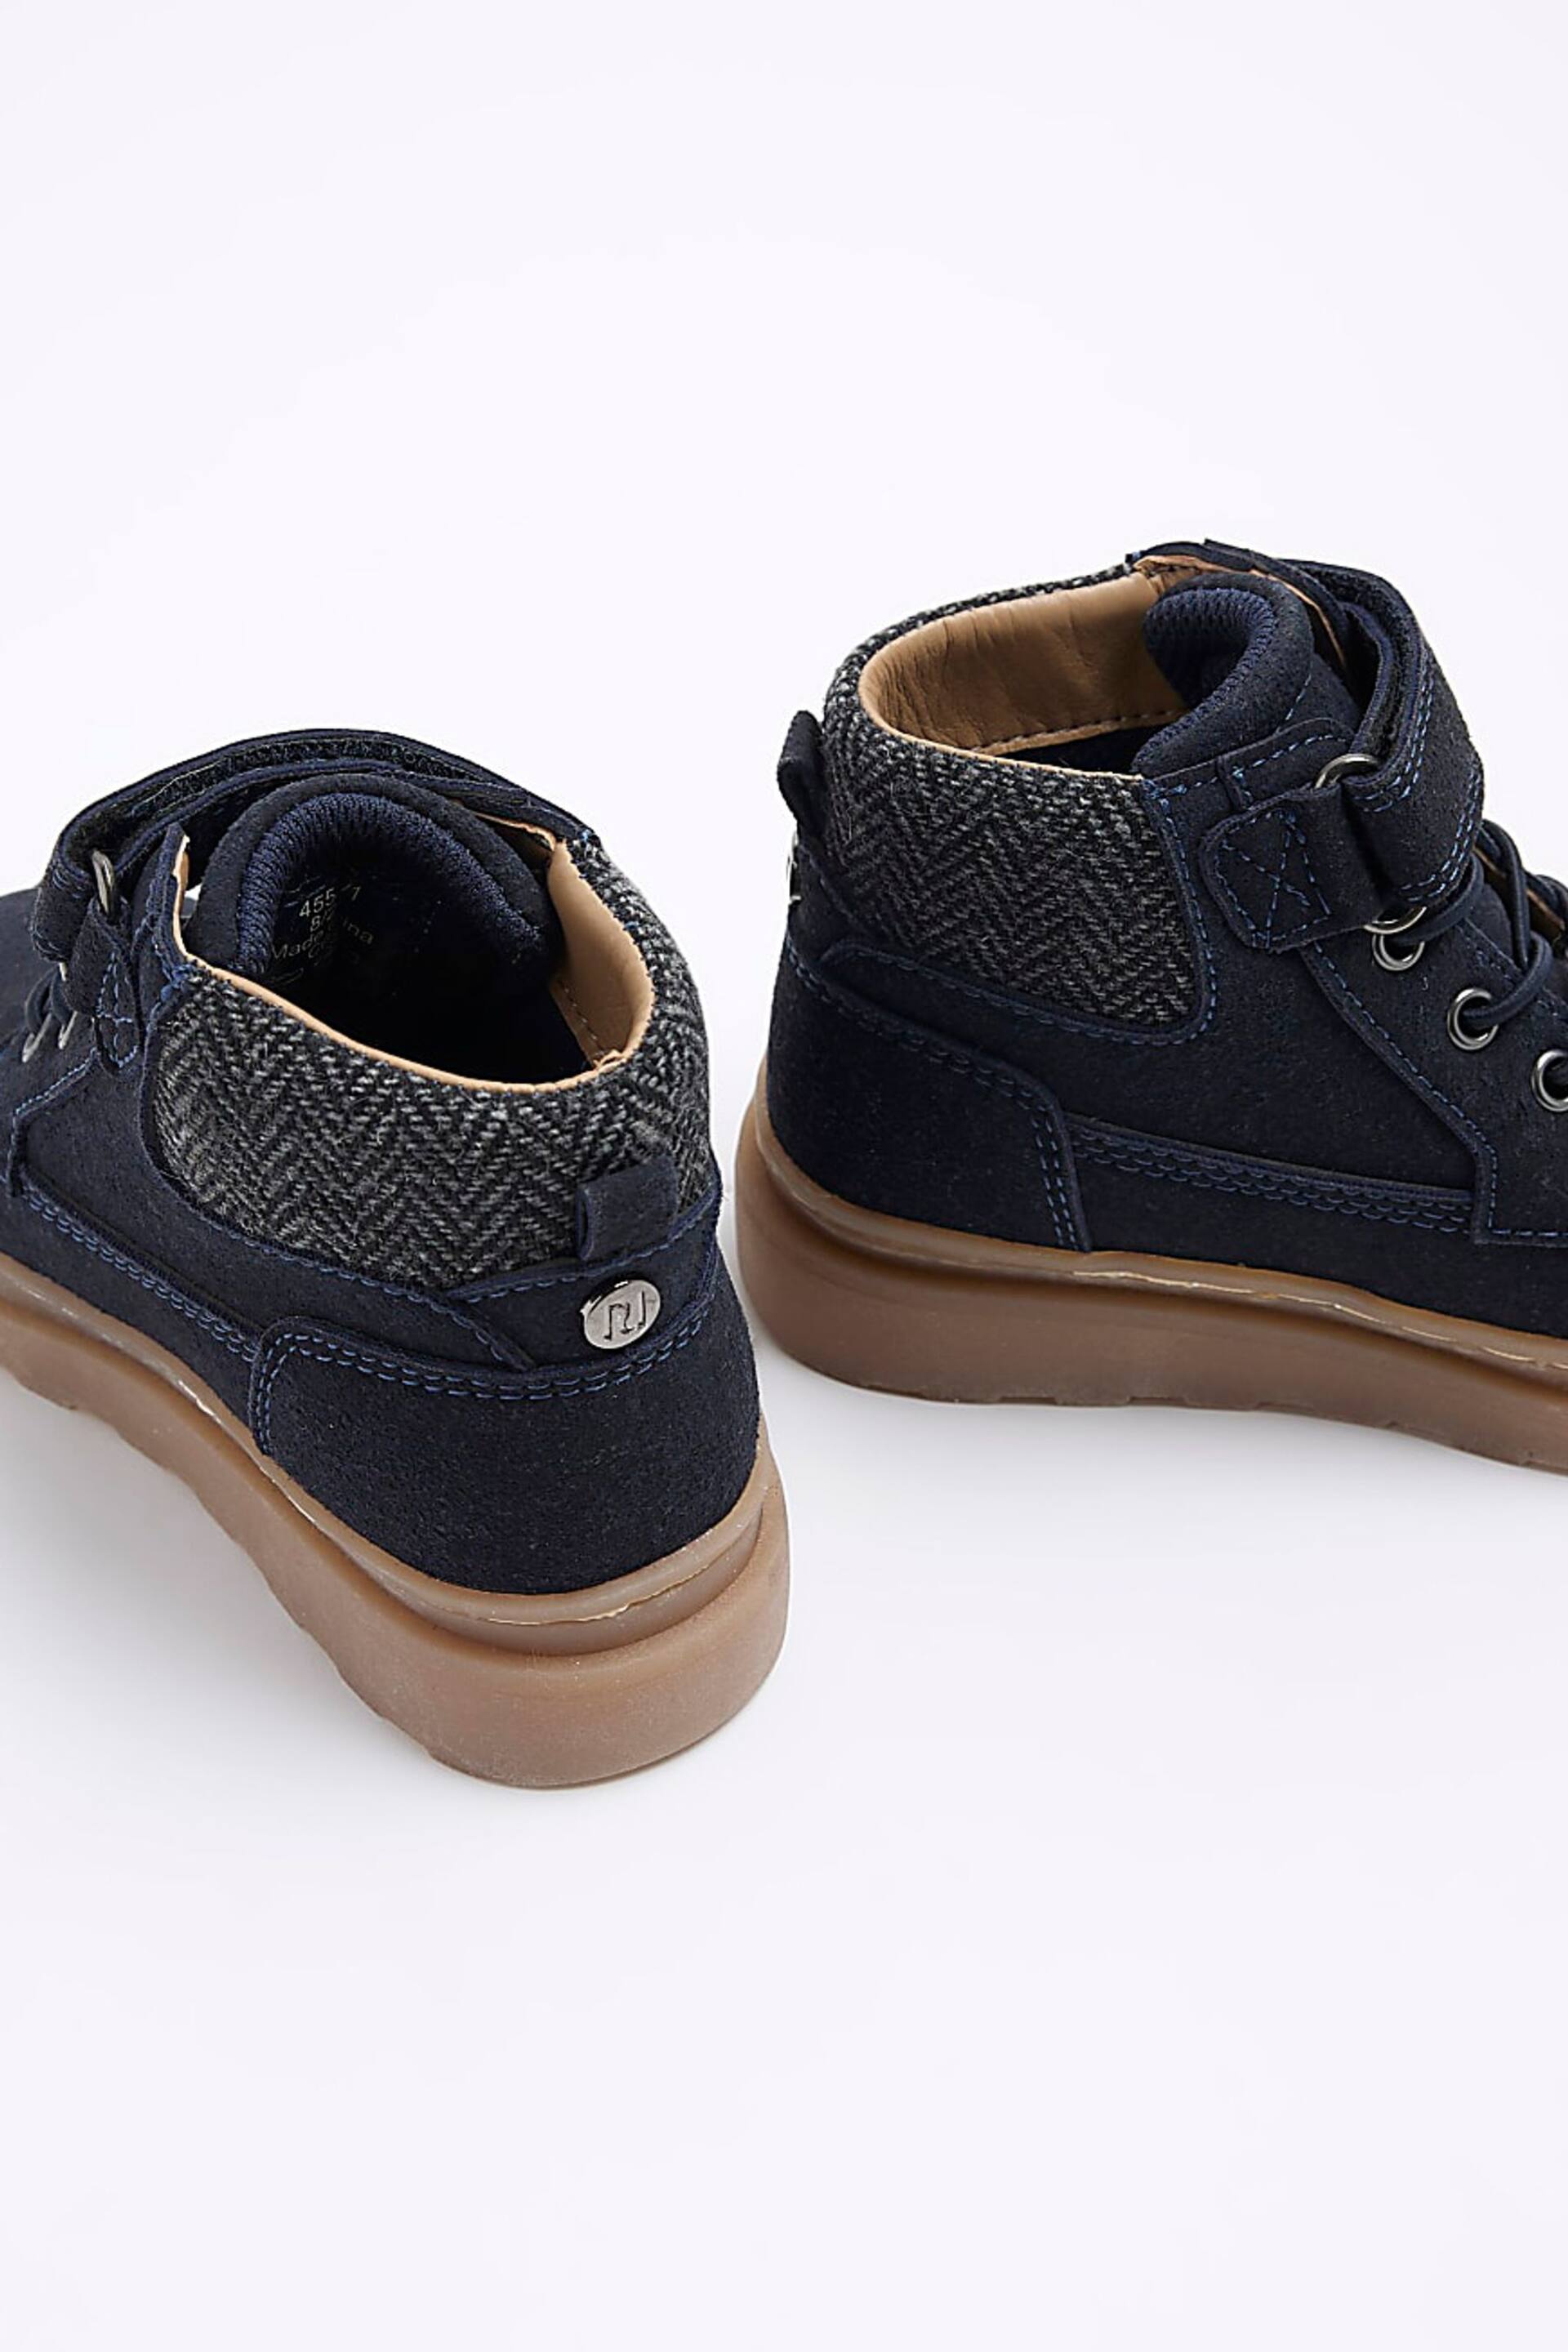 River Island Blue Navy Smart Boots - Image 5 of 5